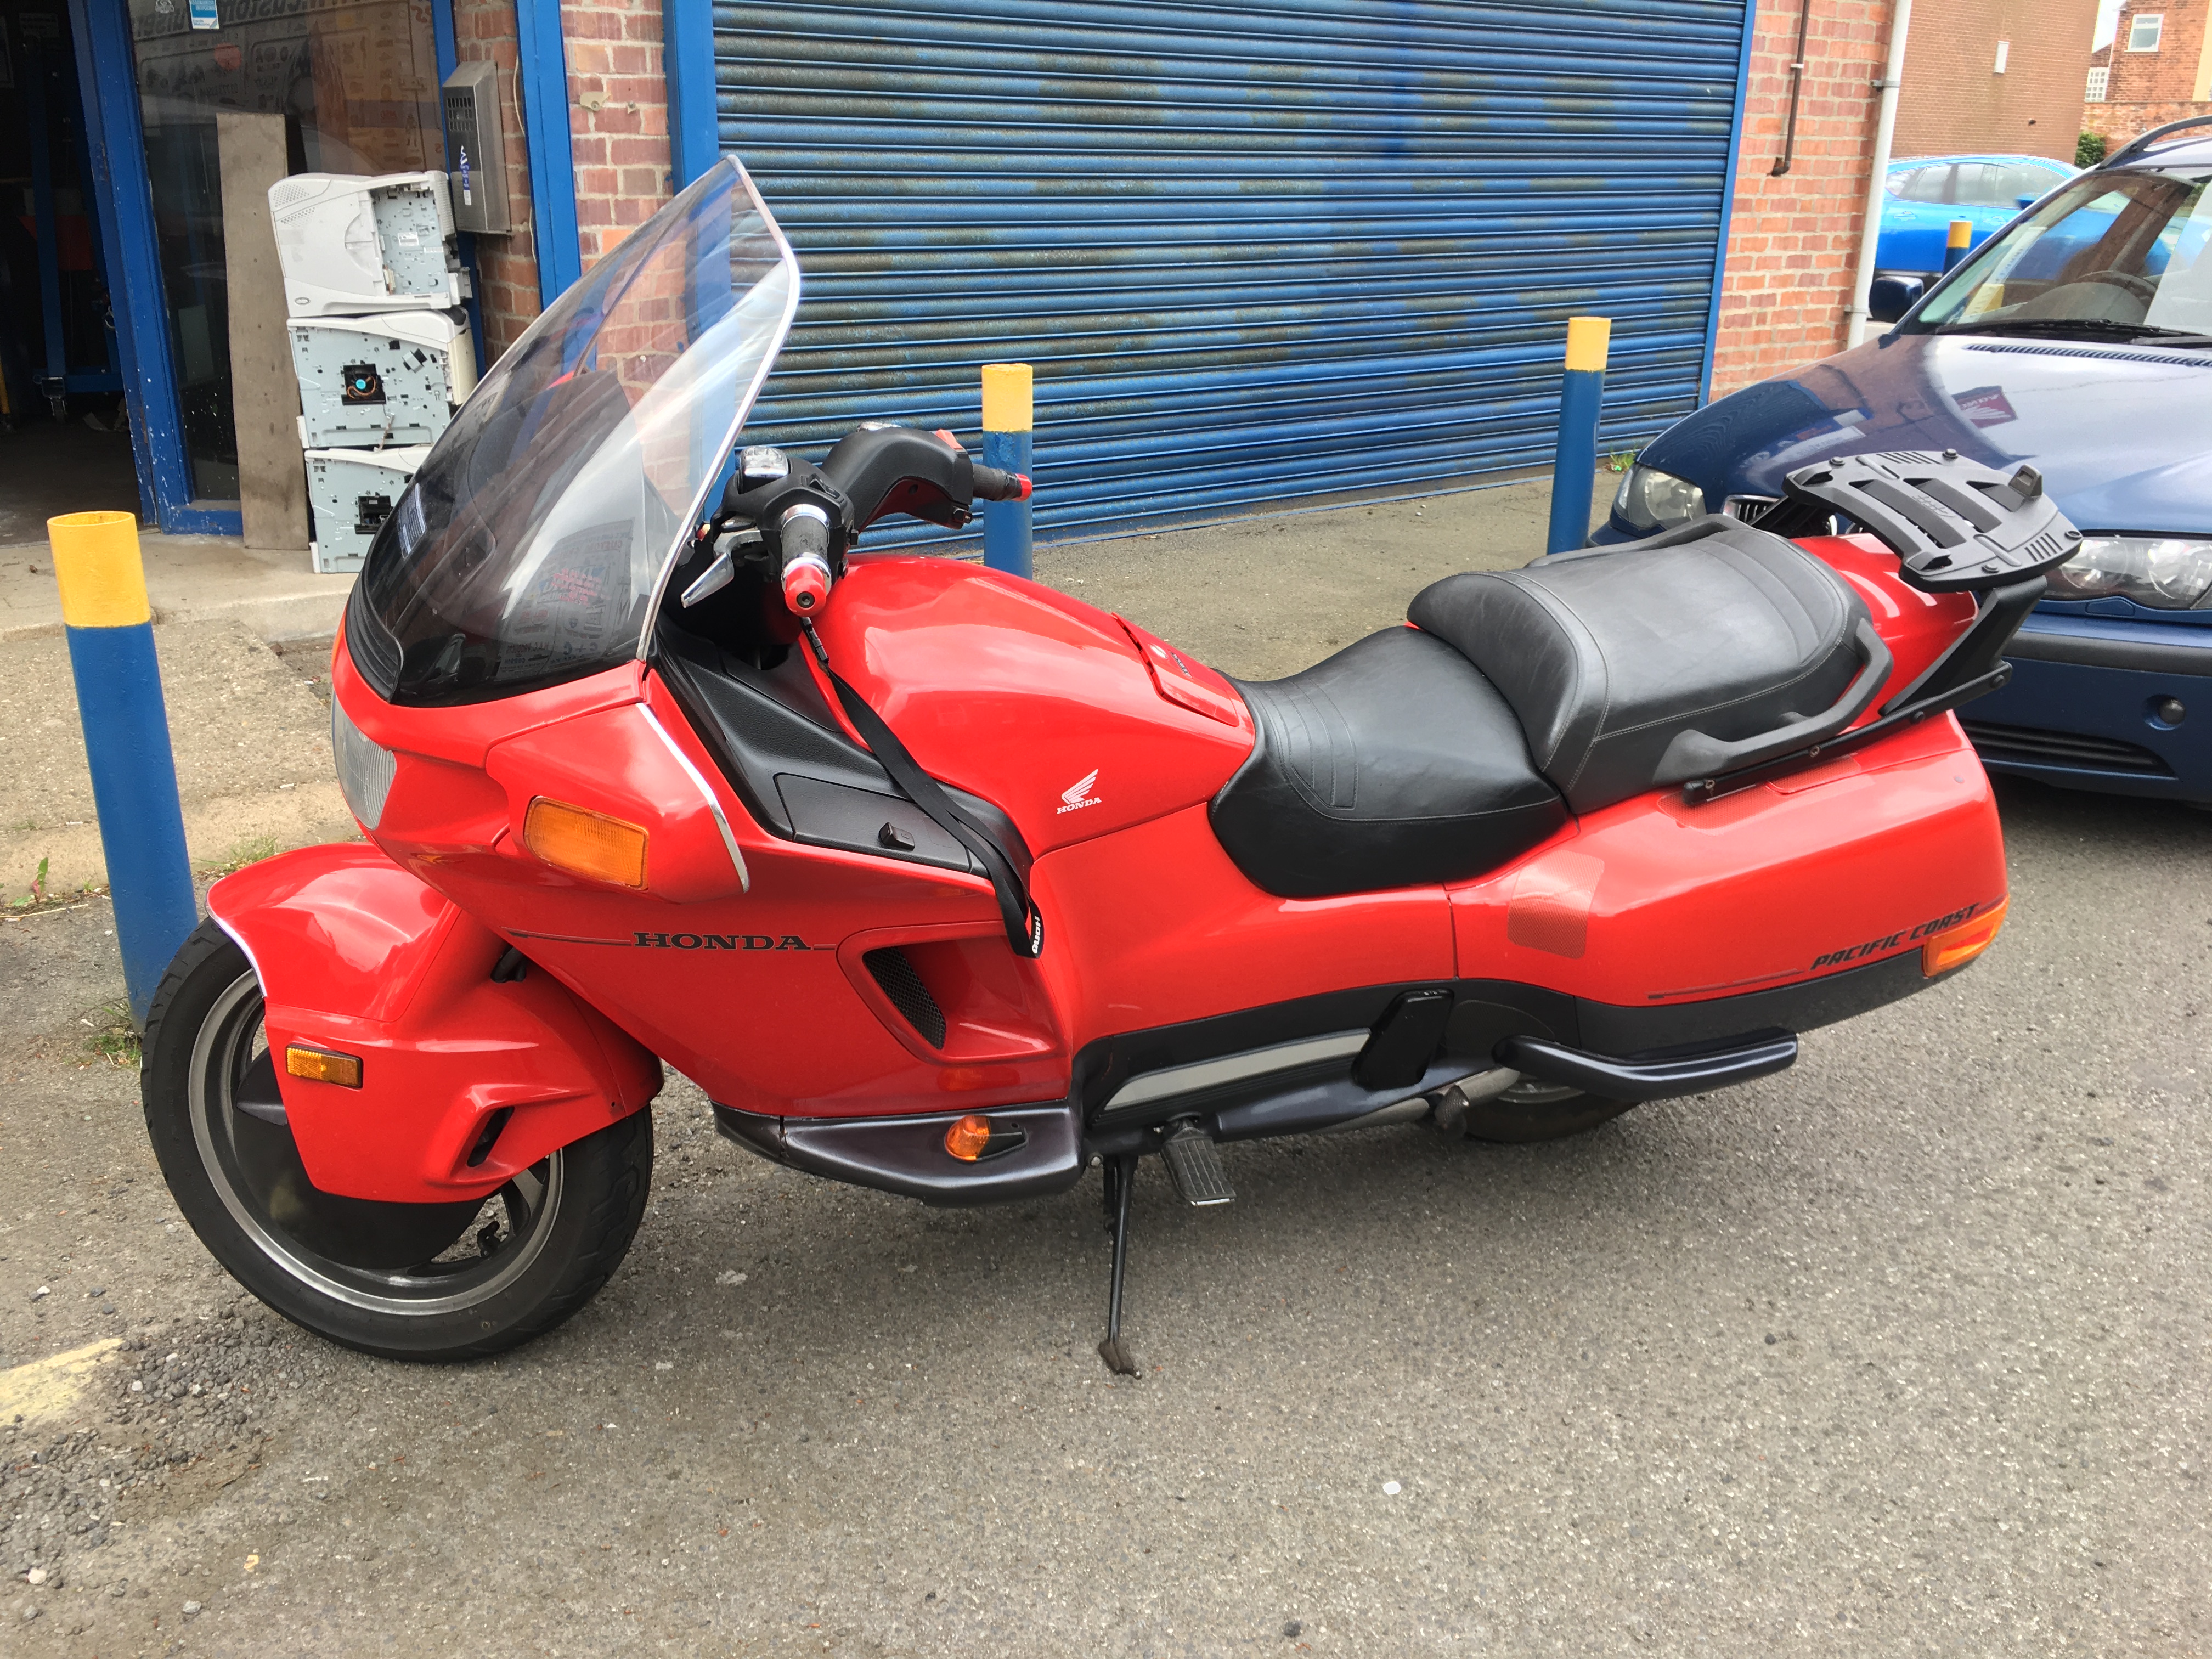 Honda PC800 RC51 Pacific Coast Motorcycle motorbike Low miles for sale 1996   miles Derbyshire UK